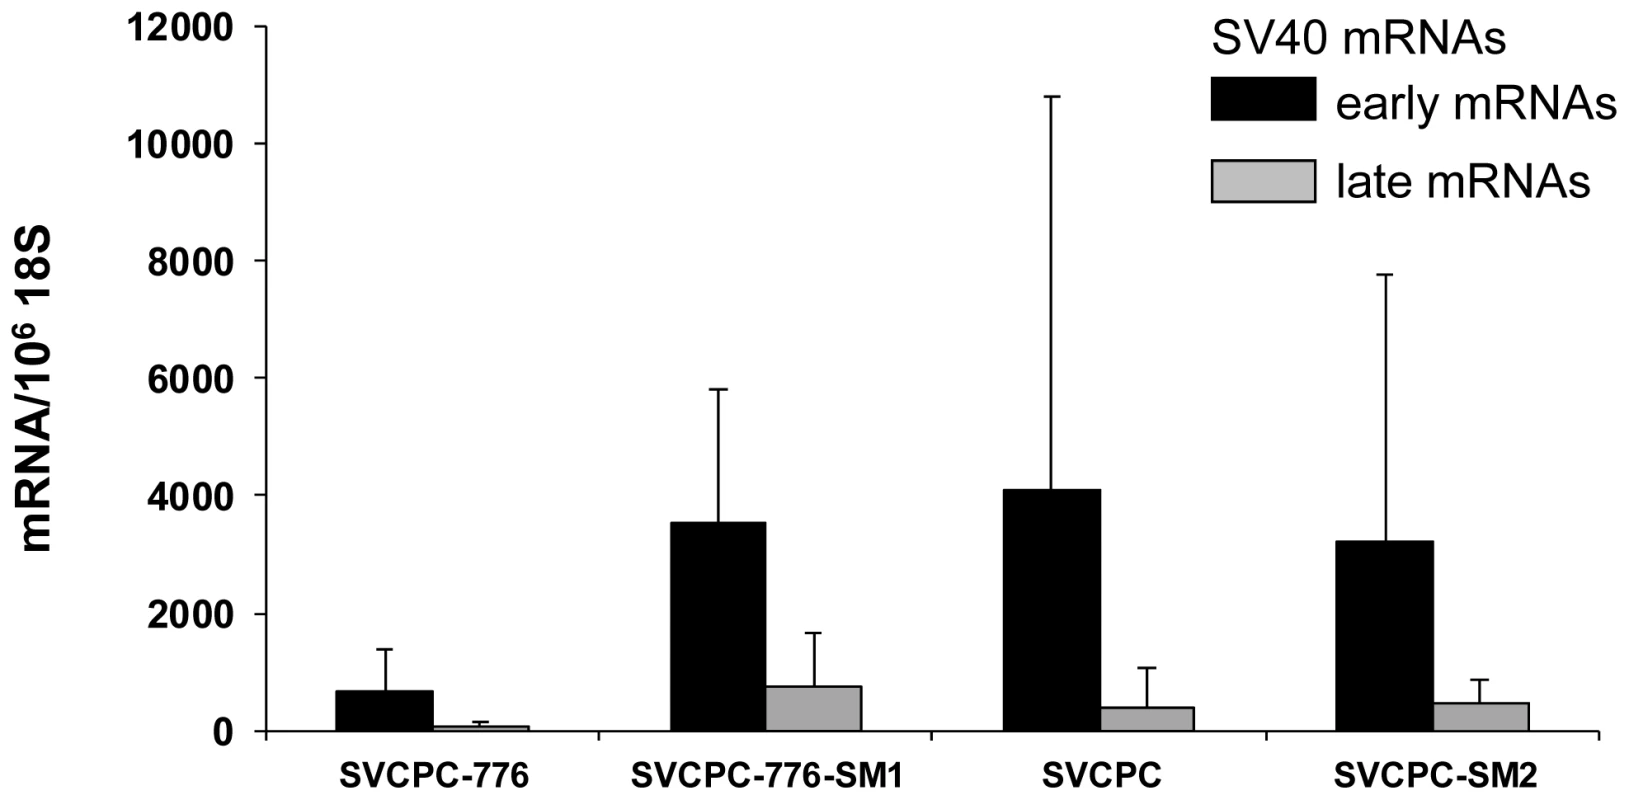 Detection of simian virus 40 (SV40) early and late mRNAs in hamster tumors induced by wild-type viruses and microRNA-negative mutants following intraperitoneal inoculation.